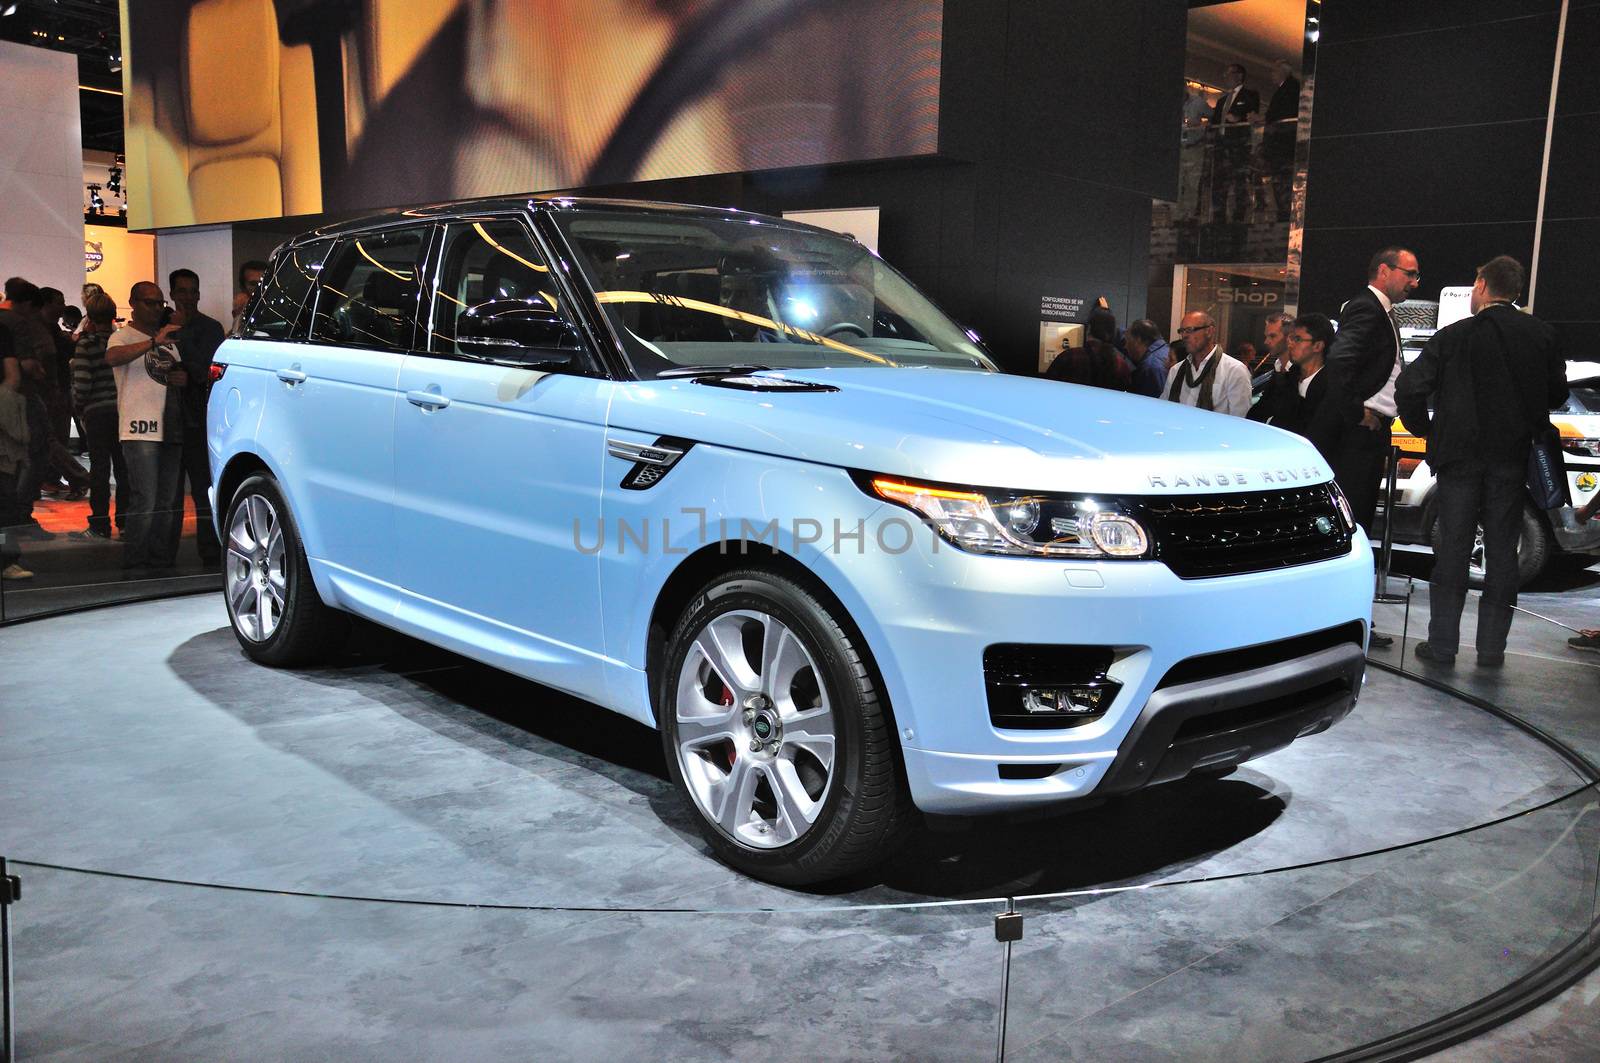 FRANKFURT - SEPT 14: Land Rover Range Rover presented as world premiere at the 65th IAA (Internationale Automobil Ausstellung) on September 14, 2013 in Frankfurt, Germany